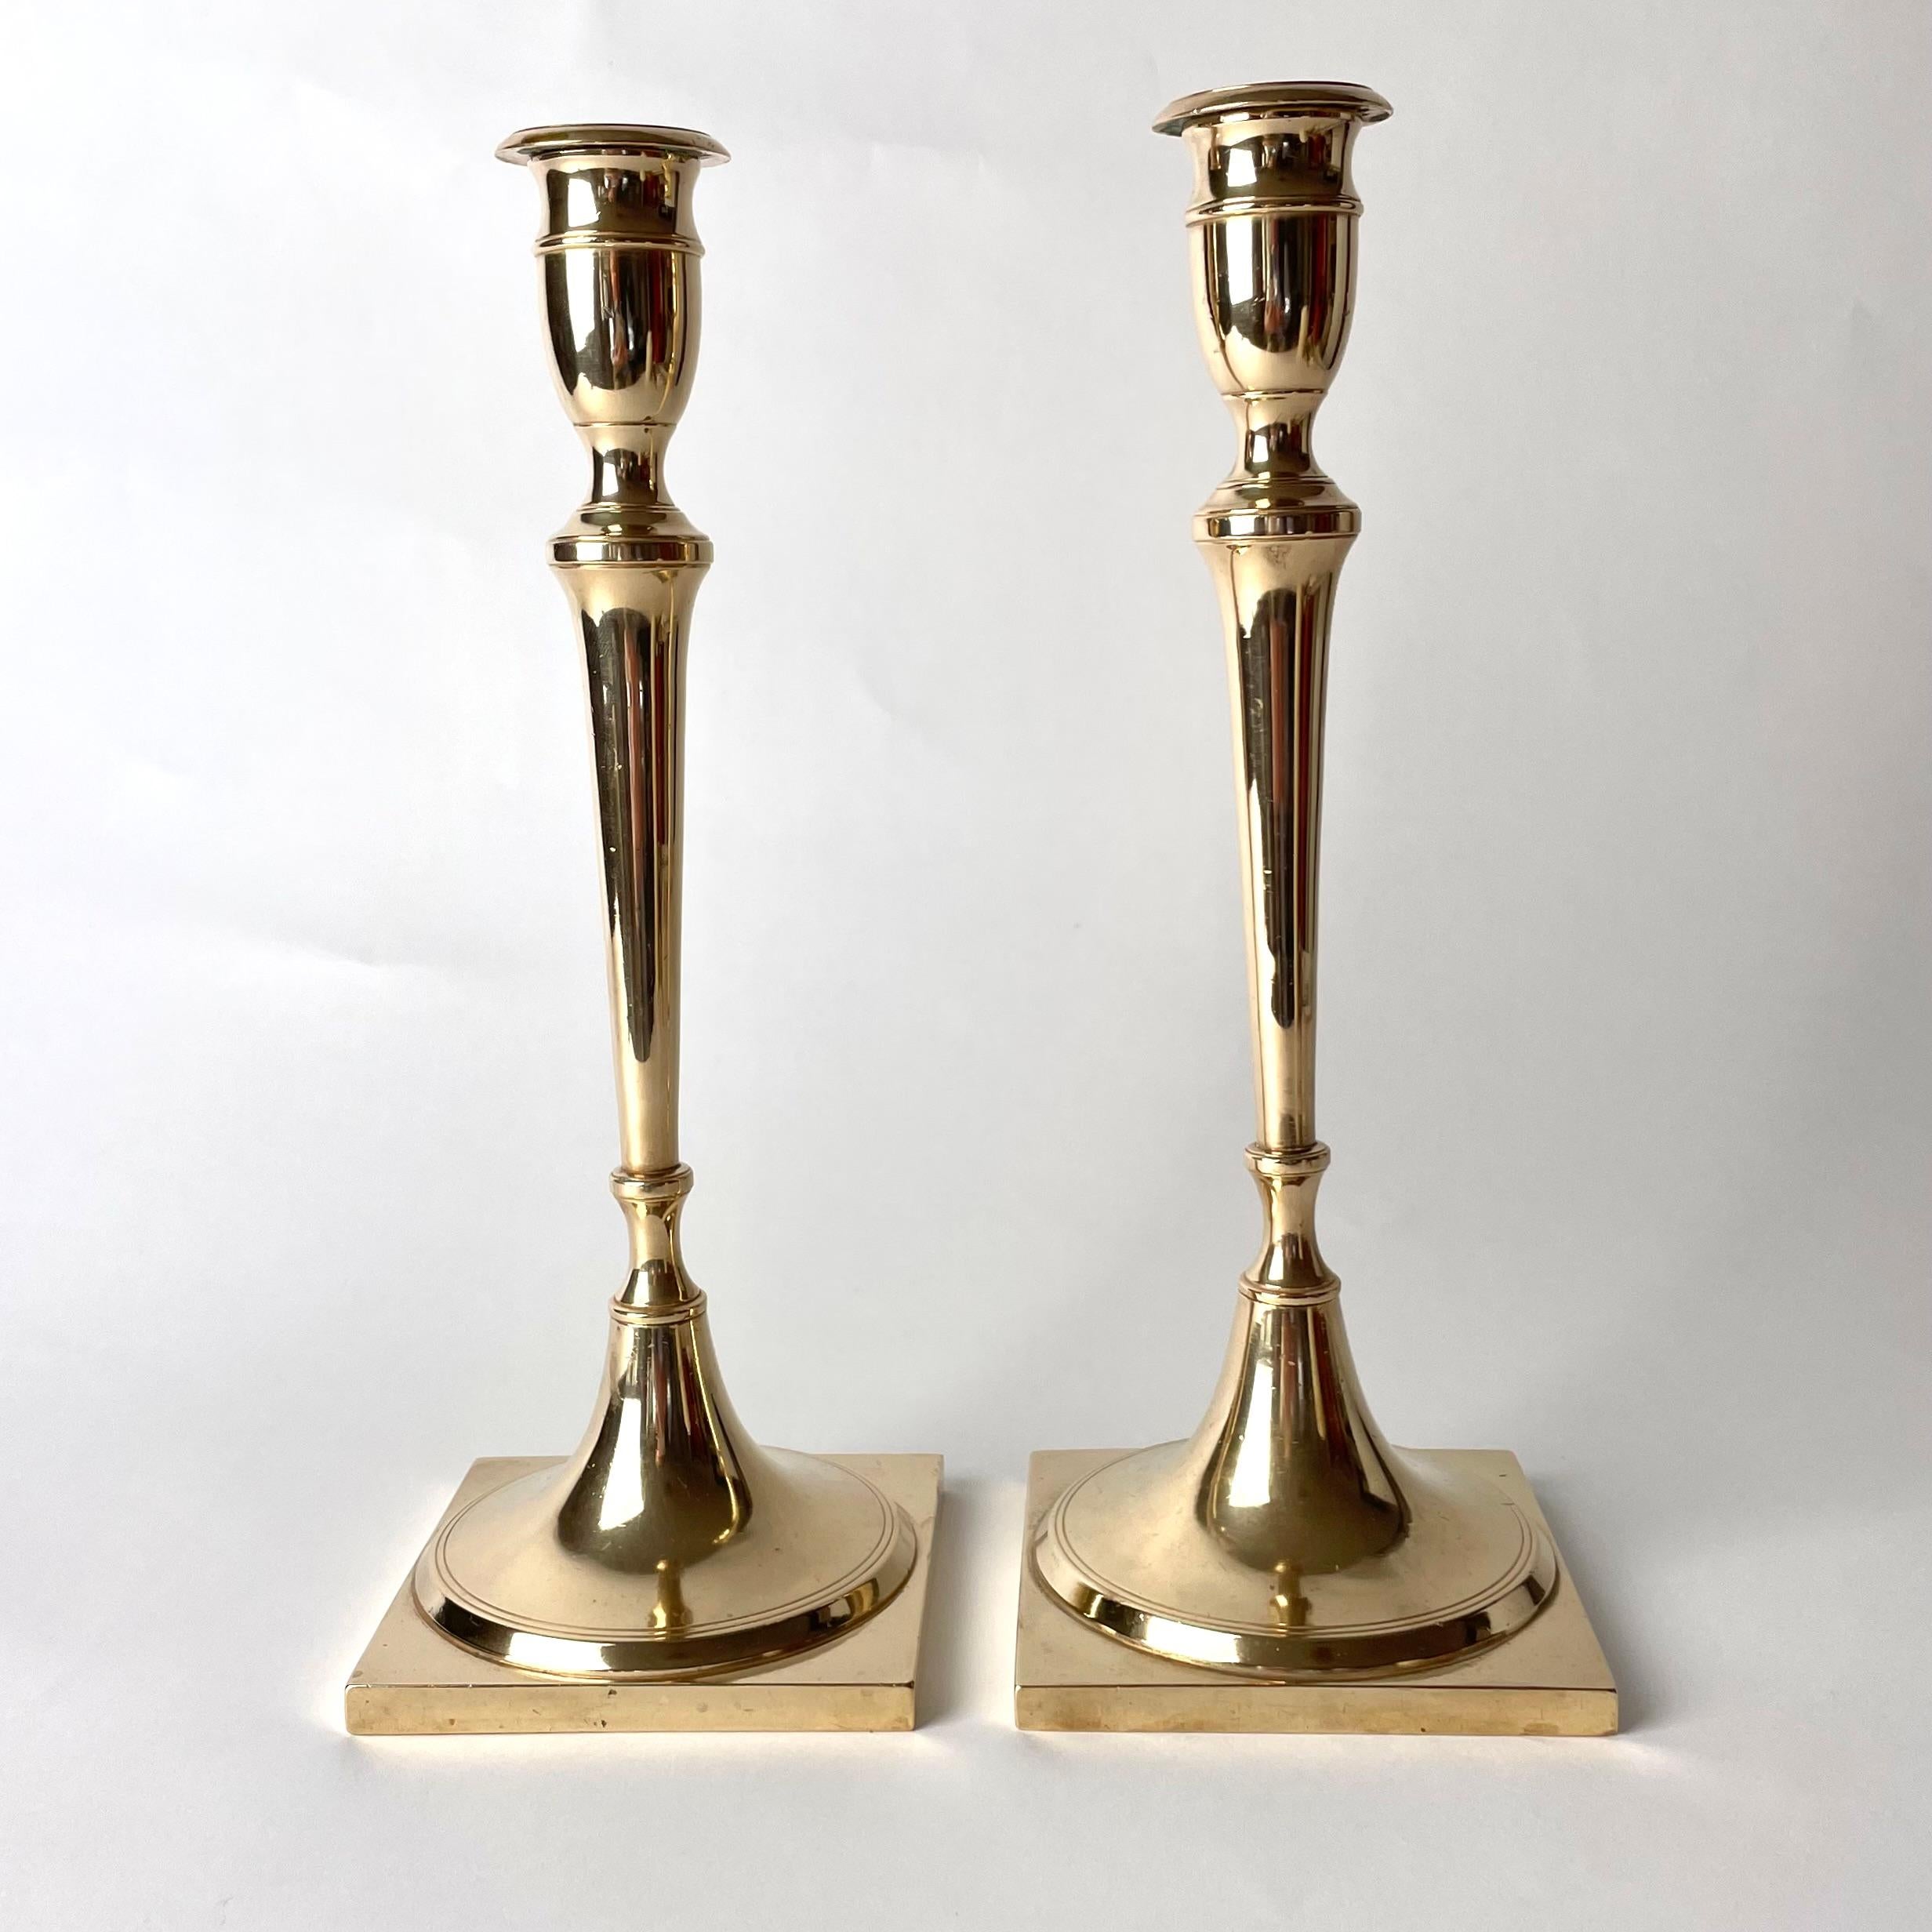 Elegant and large pair of Brass Candlesticks. Swedish Karl Johan from the 1820s. (Swedish Empire). Simple and beautiful model with a square base and only two stripes as decoration.

Wear consistent with age and use 